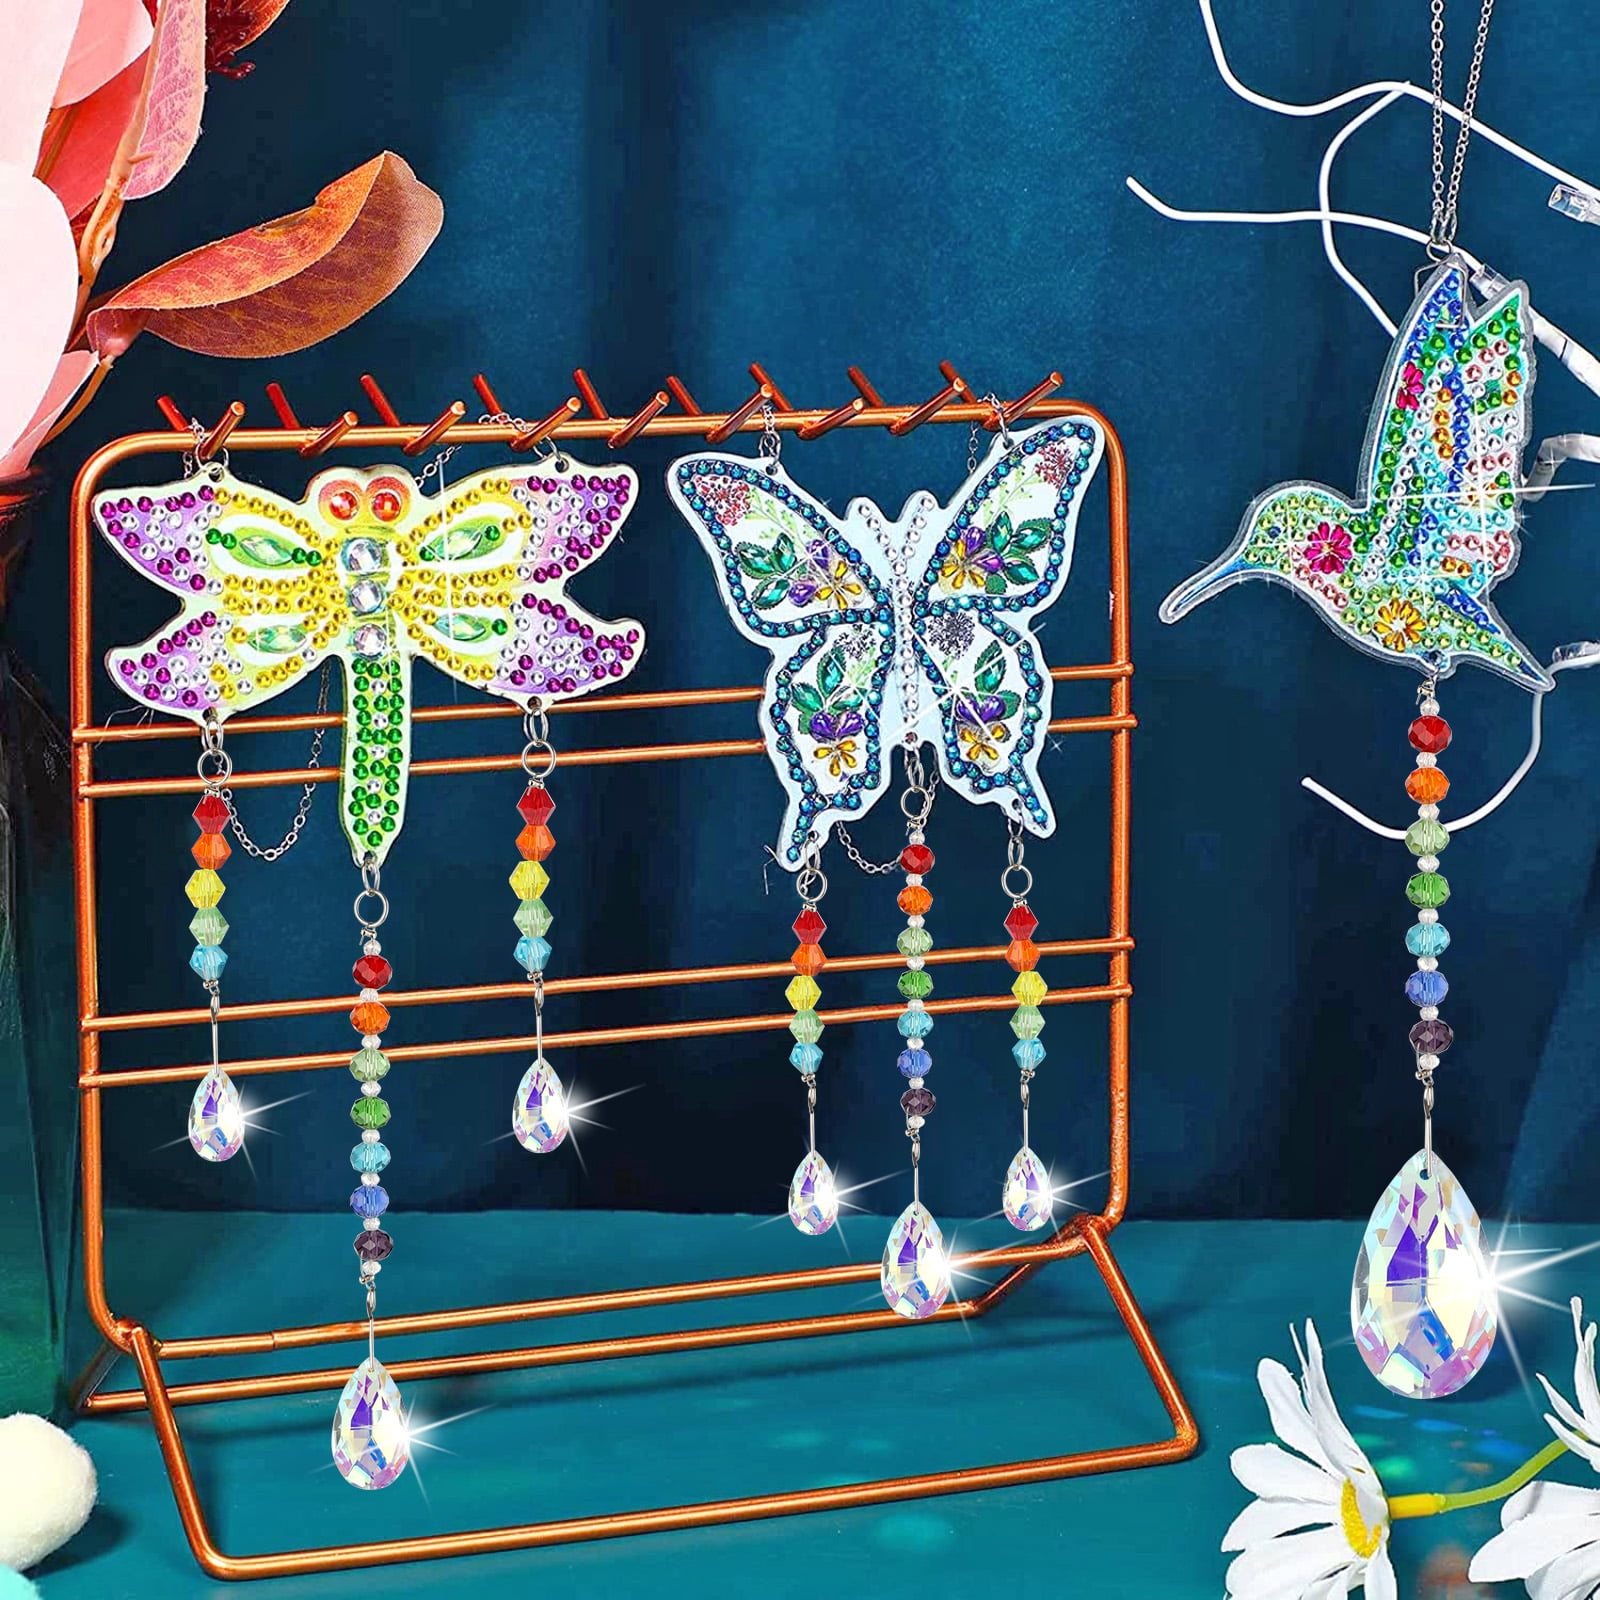 2021 Hot Sale Small Size Colorful Butterfly Diy 5d Diamond Painting Wall  Stickers $1.66 - Wholesale China Diamond Painting at factory prices from  Yiwu Roundsail Trading Co., Ltd